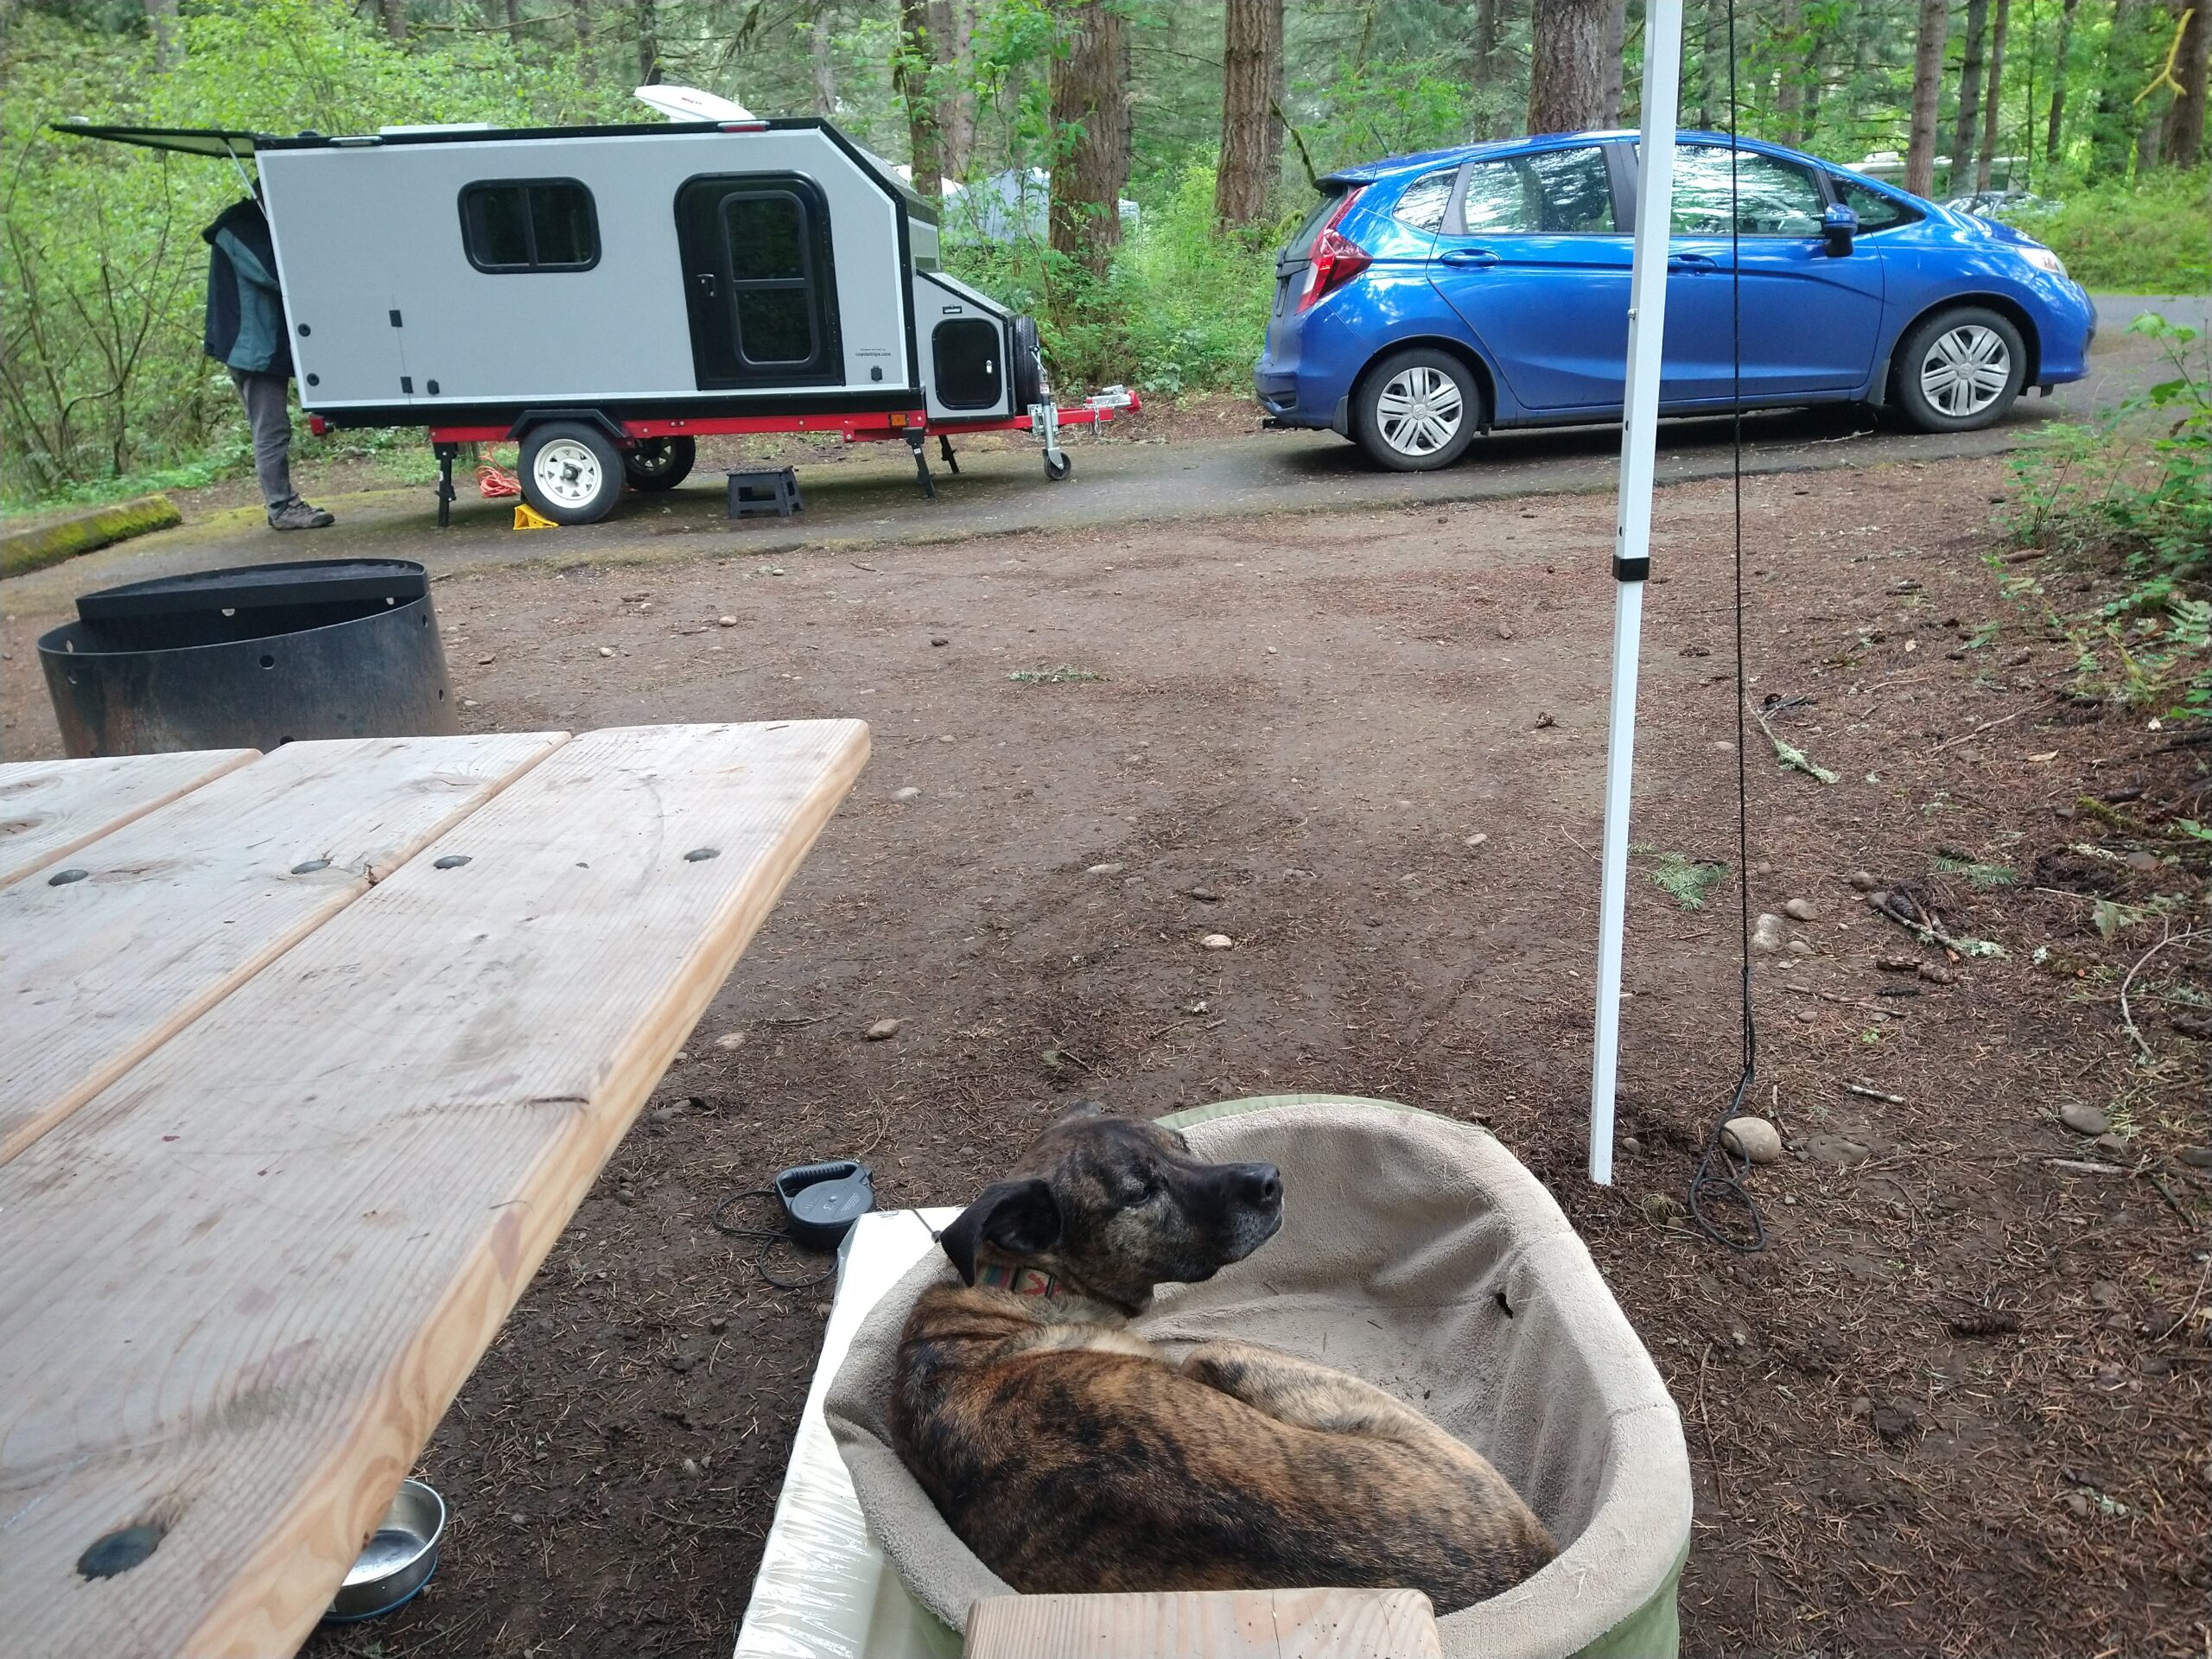 A Honda fit is in the background, in front of a square drop trailer that is not bigger than the car. Right in front of the photographer is a dog in a dog bed next to a picnic table.